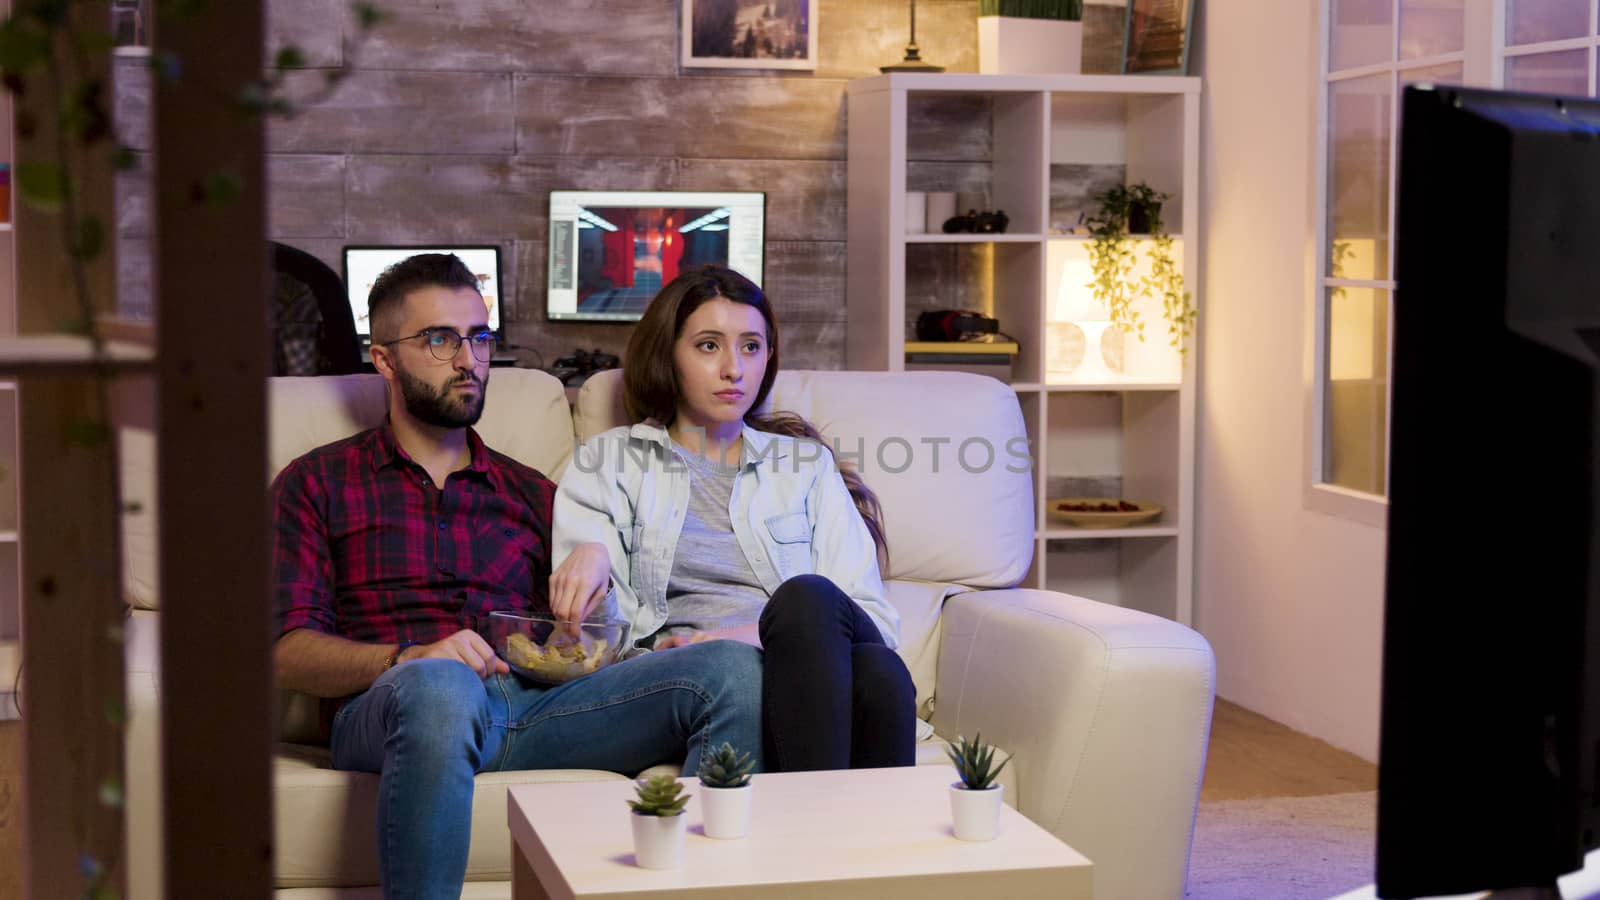 Couple sitting on couch and eating chips while watching a movie on television at night.